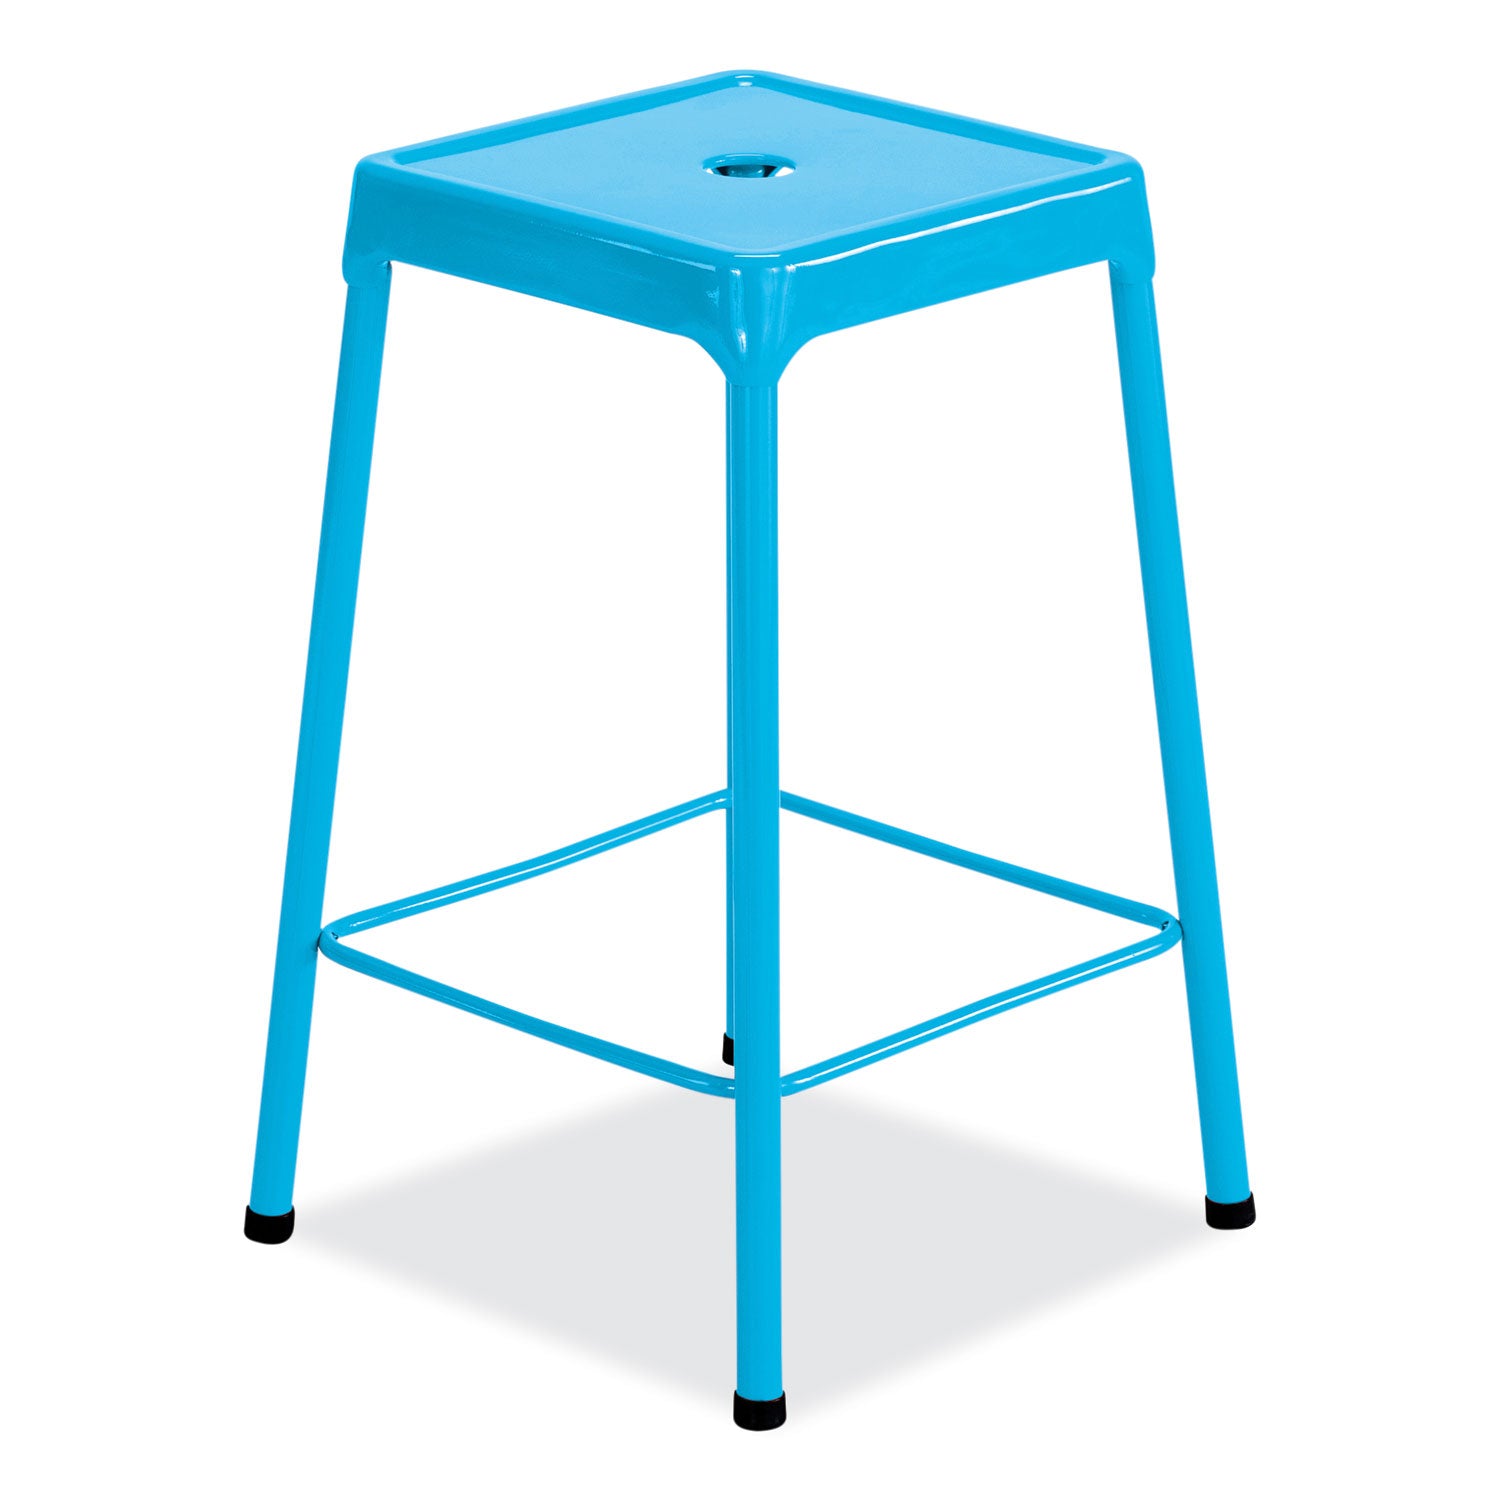 steel-counter-stool-backless-supports-up-to-250-lb-25-high-babyblue-seat-babyblue-base-ships-in-1-3-business-days_saf6605bu - 1